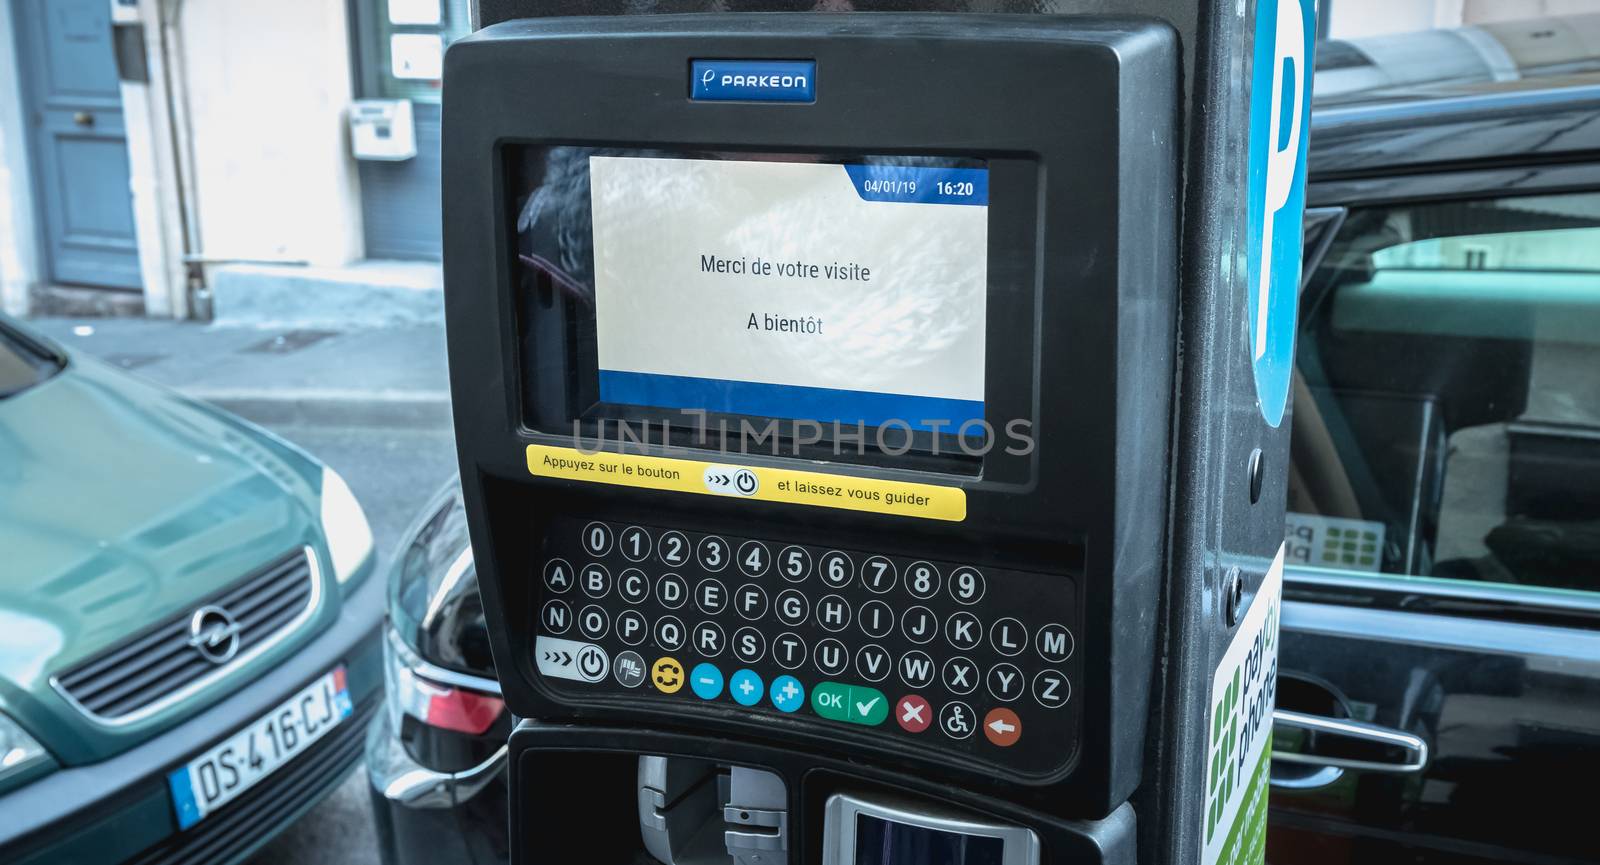 Sete, France - January 4, 2019: Thank you for your visit, see you soon in French on a parking ticket machine on a winter day